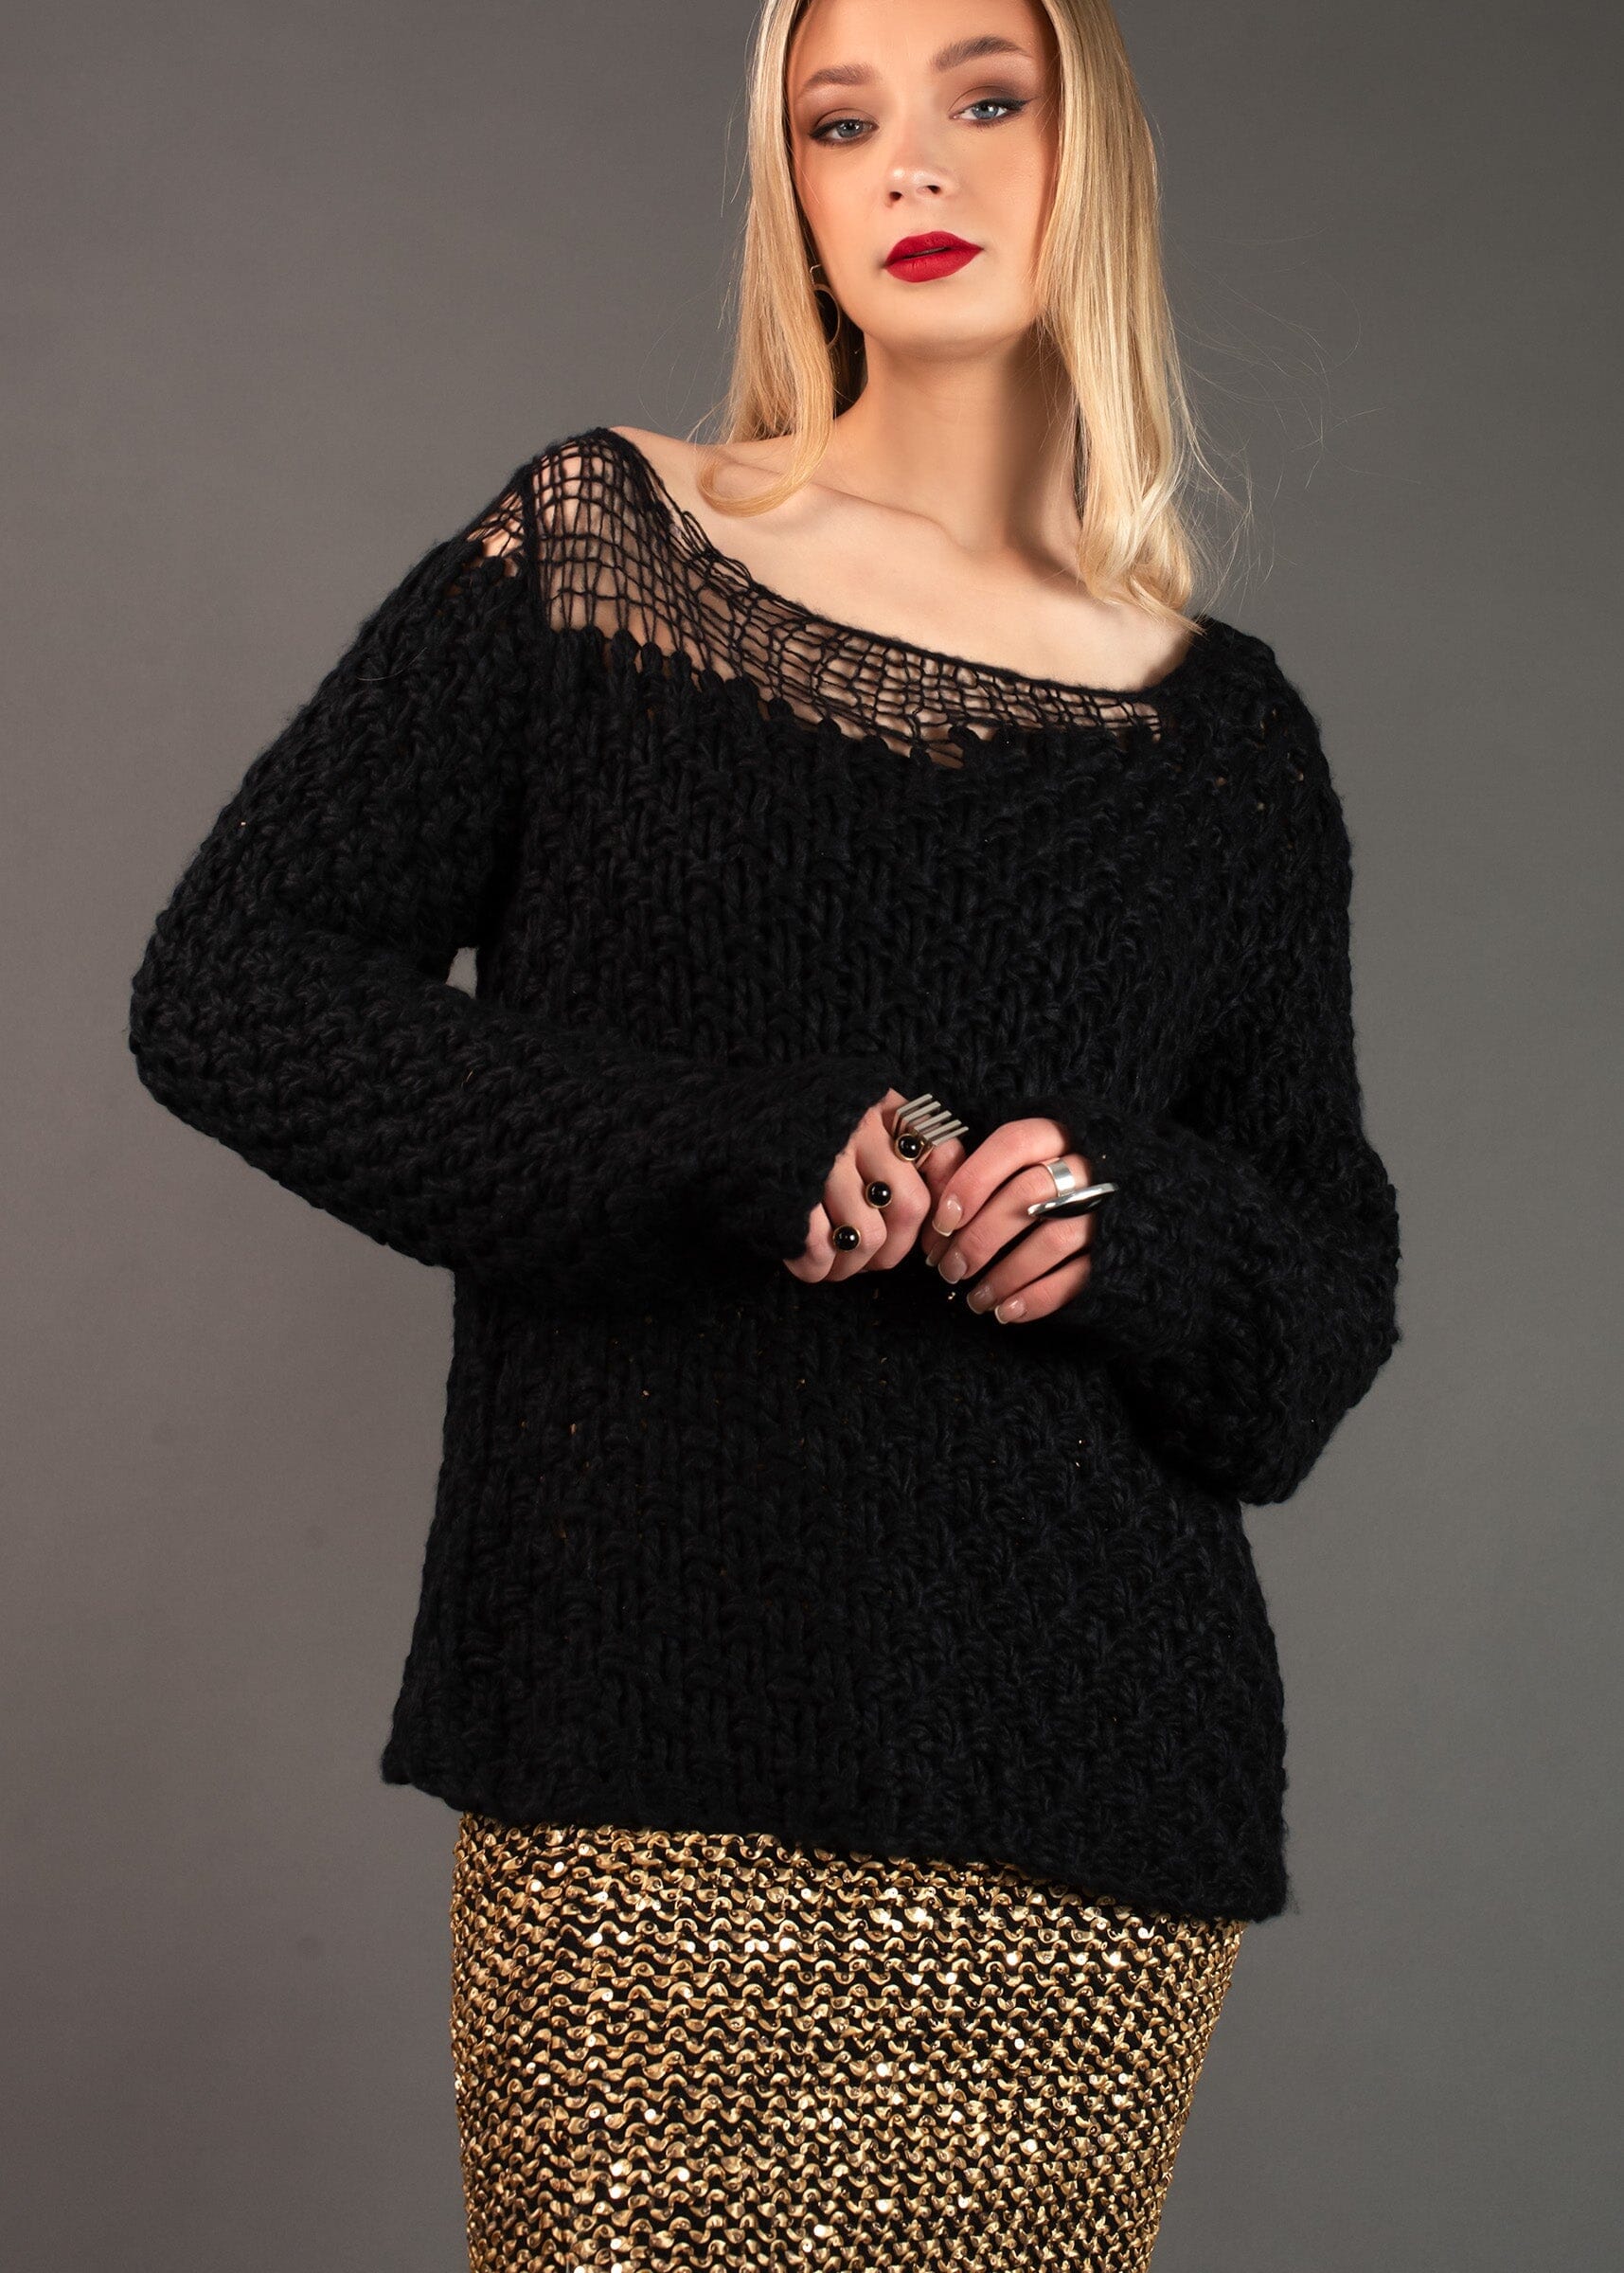 Loose Stitched Knit Sweater Sweaters Kate Hewko Black S 